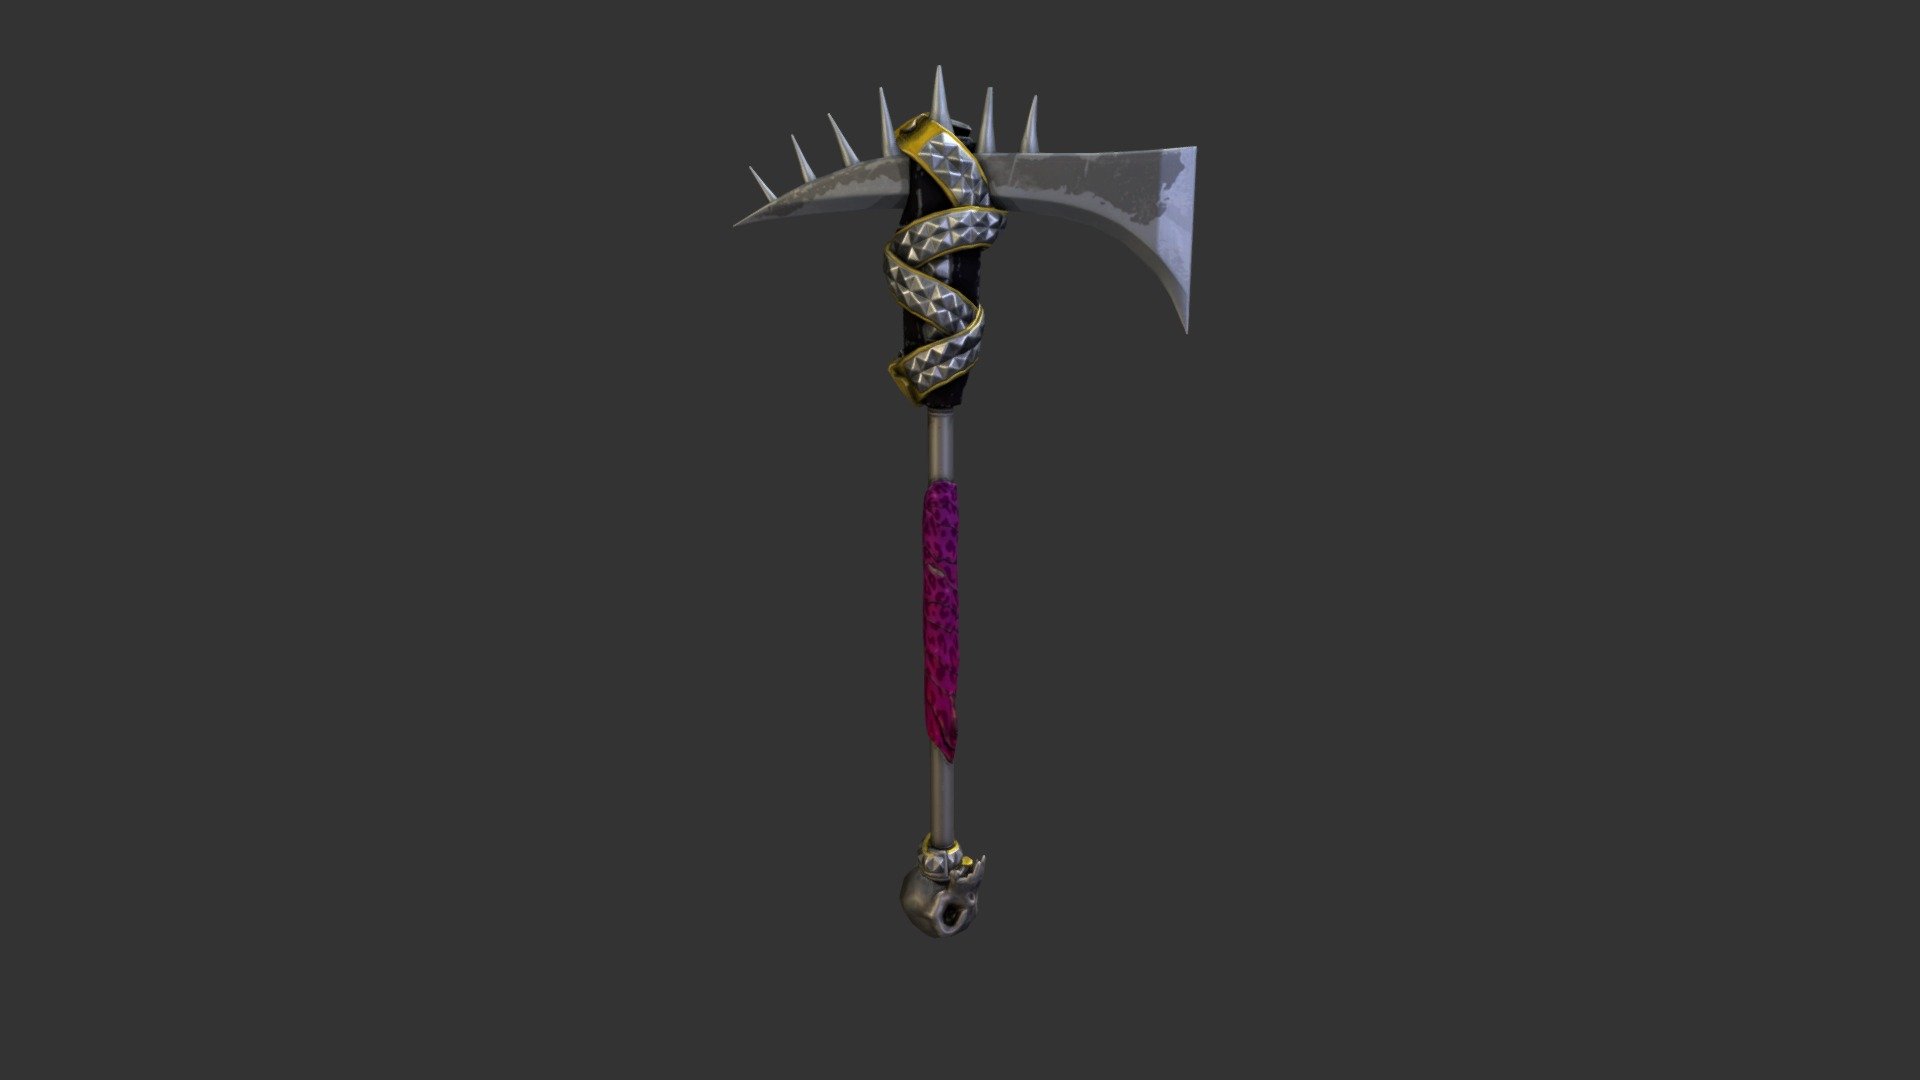 Anarchy Axe Harvesting Tool